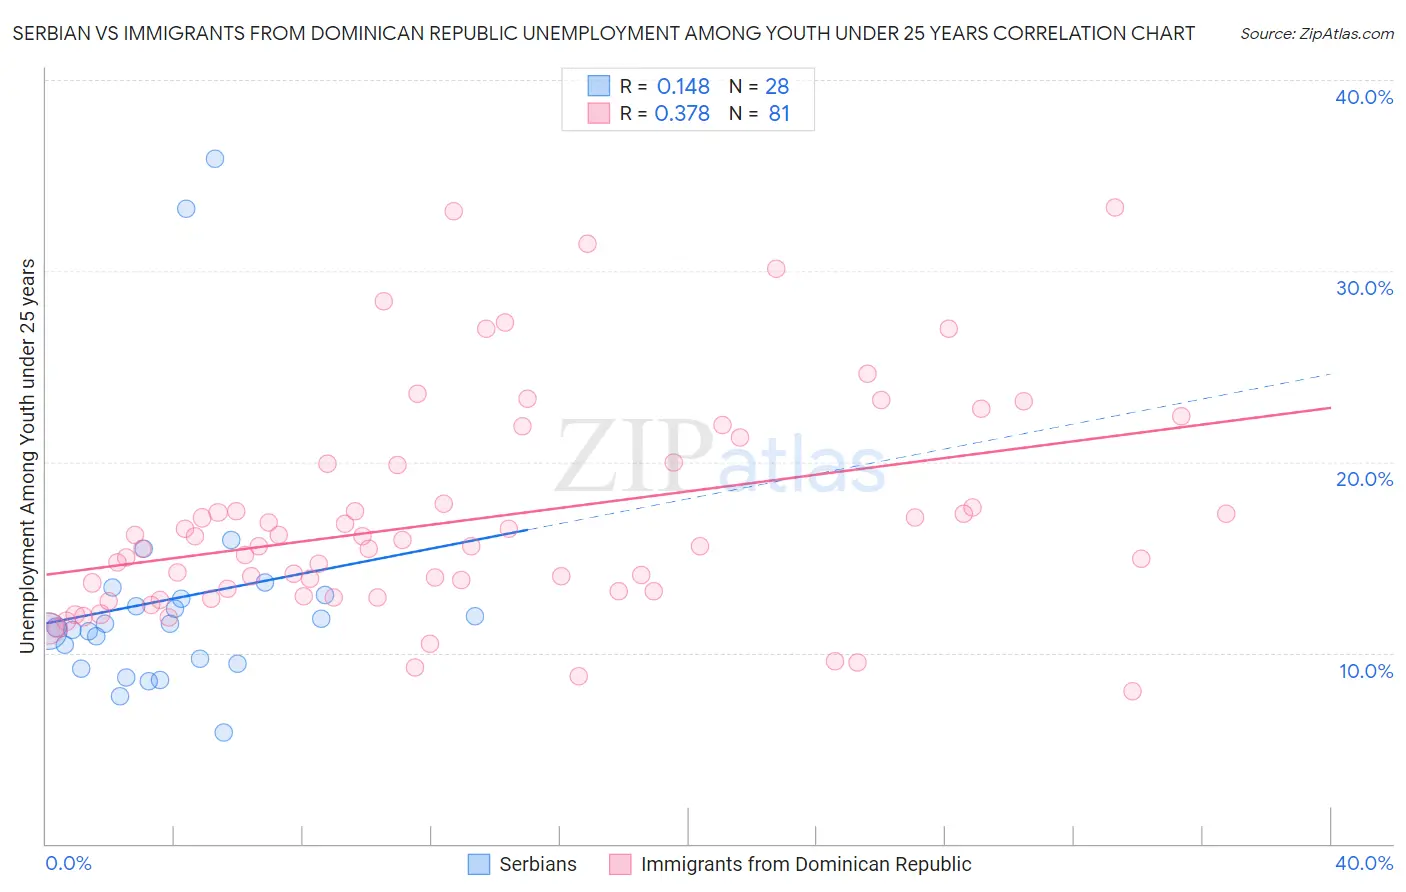 Serbian vs Immigrants from Dominican Republic Unemployment Among Youth under 25 years